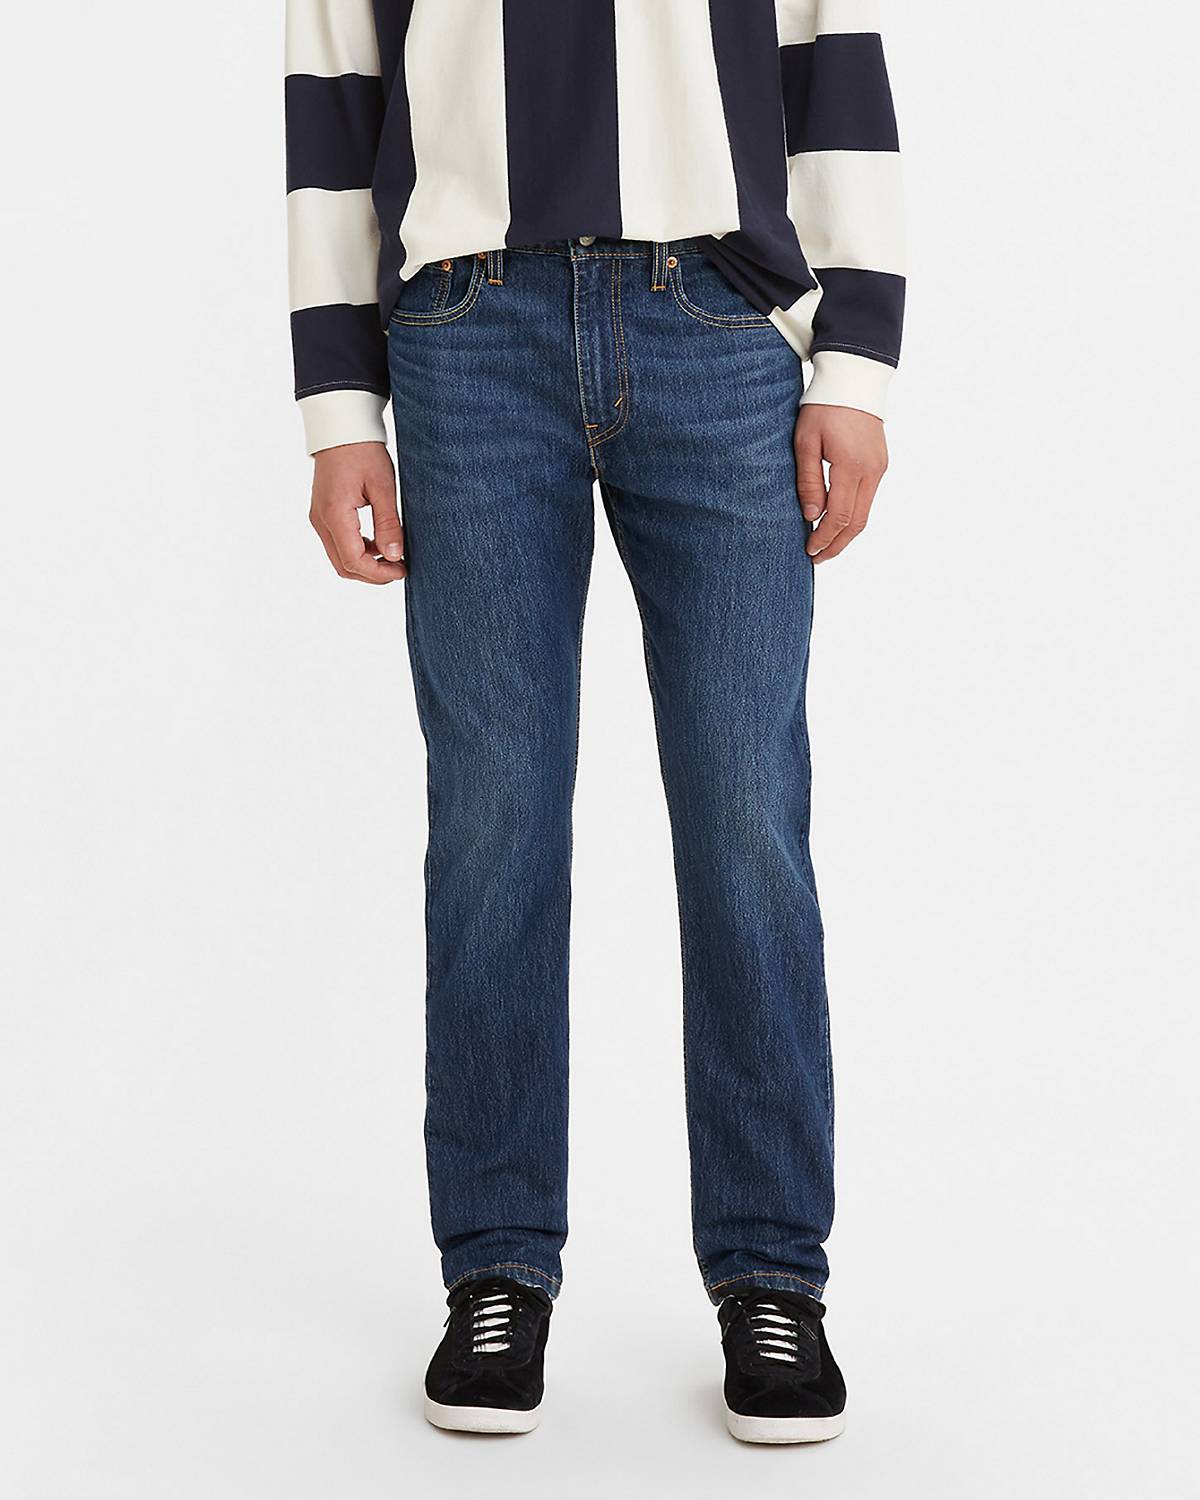 Man in tapered jeans